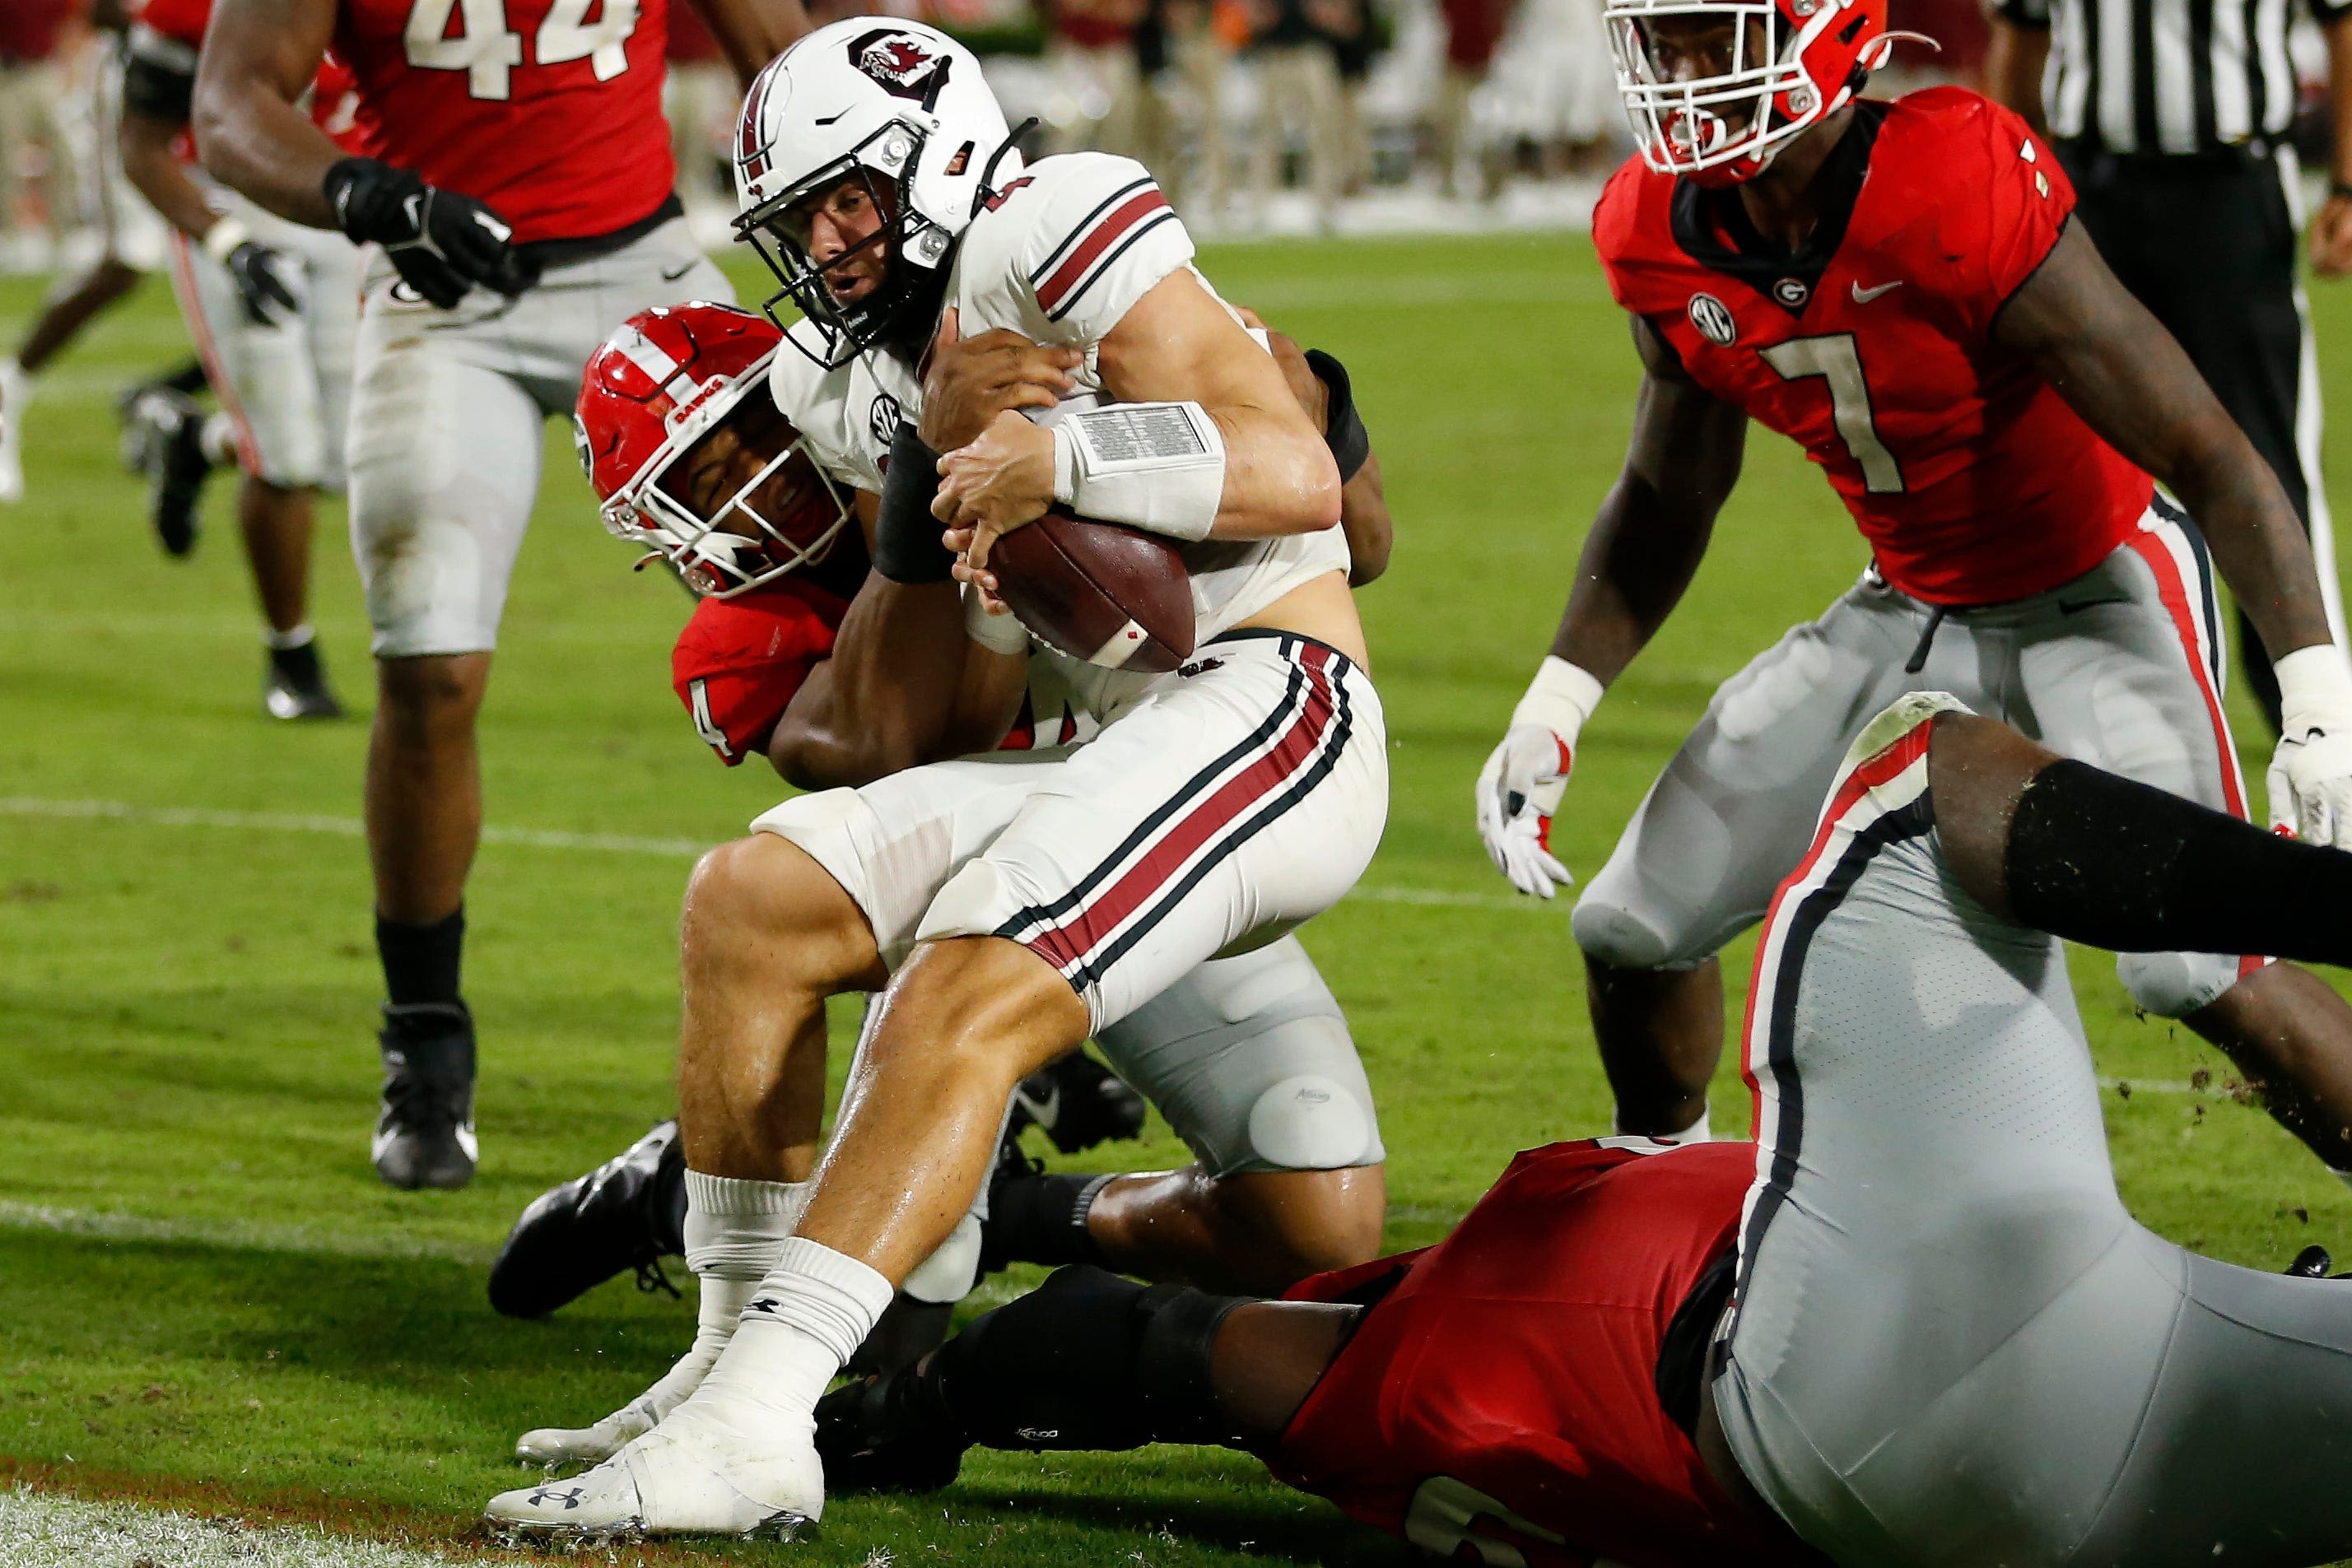 Georgia football vs. South Carolina hits pause in SEC. 'Going to be weird not playing'